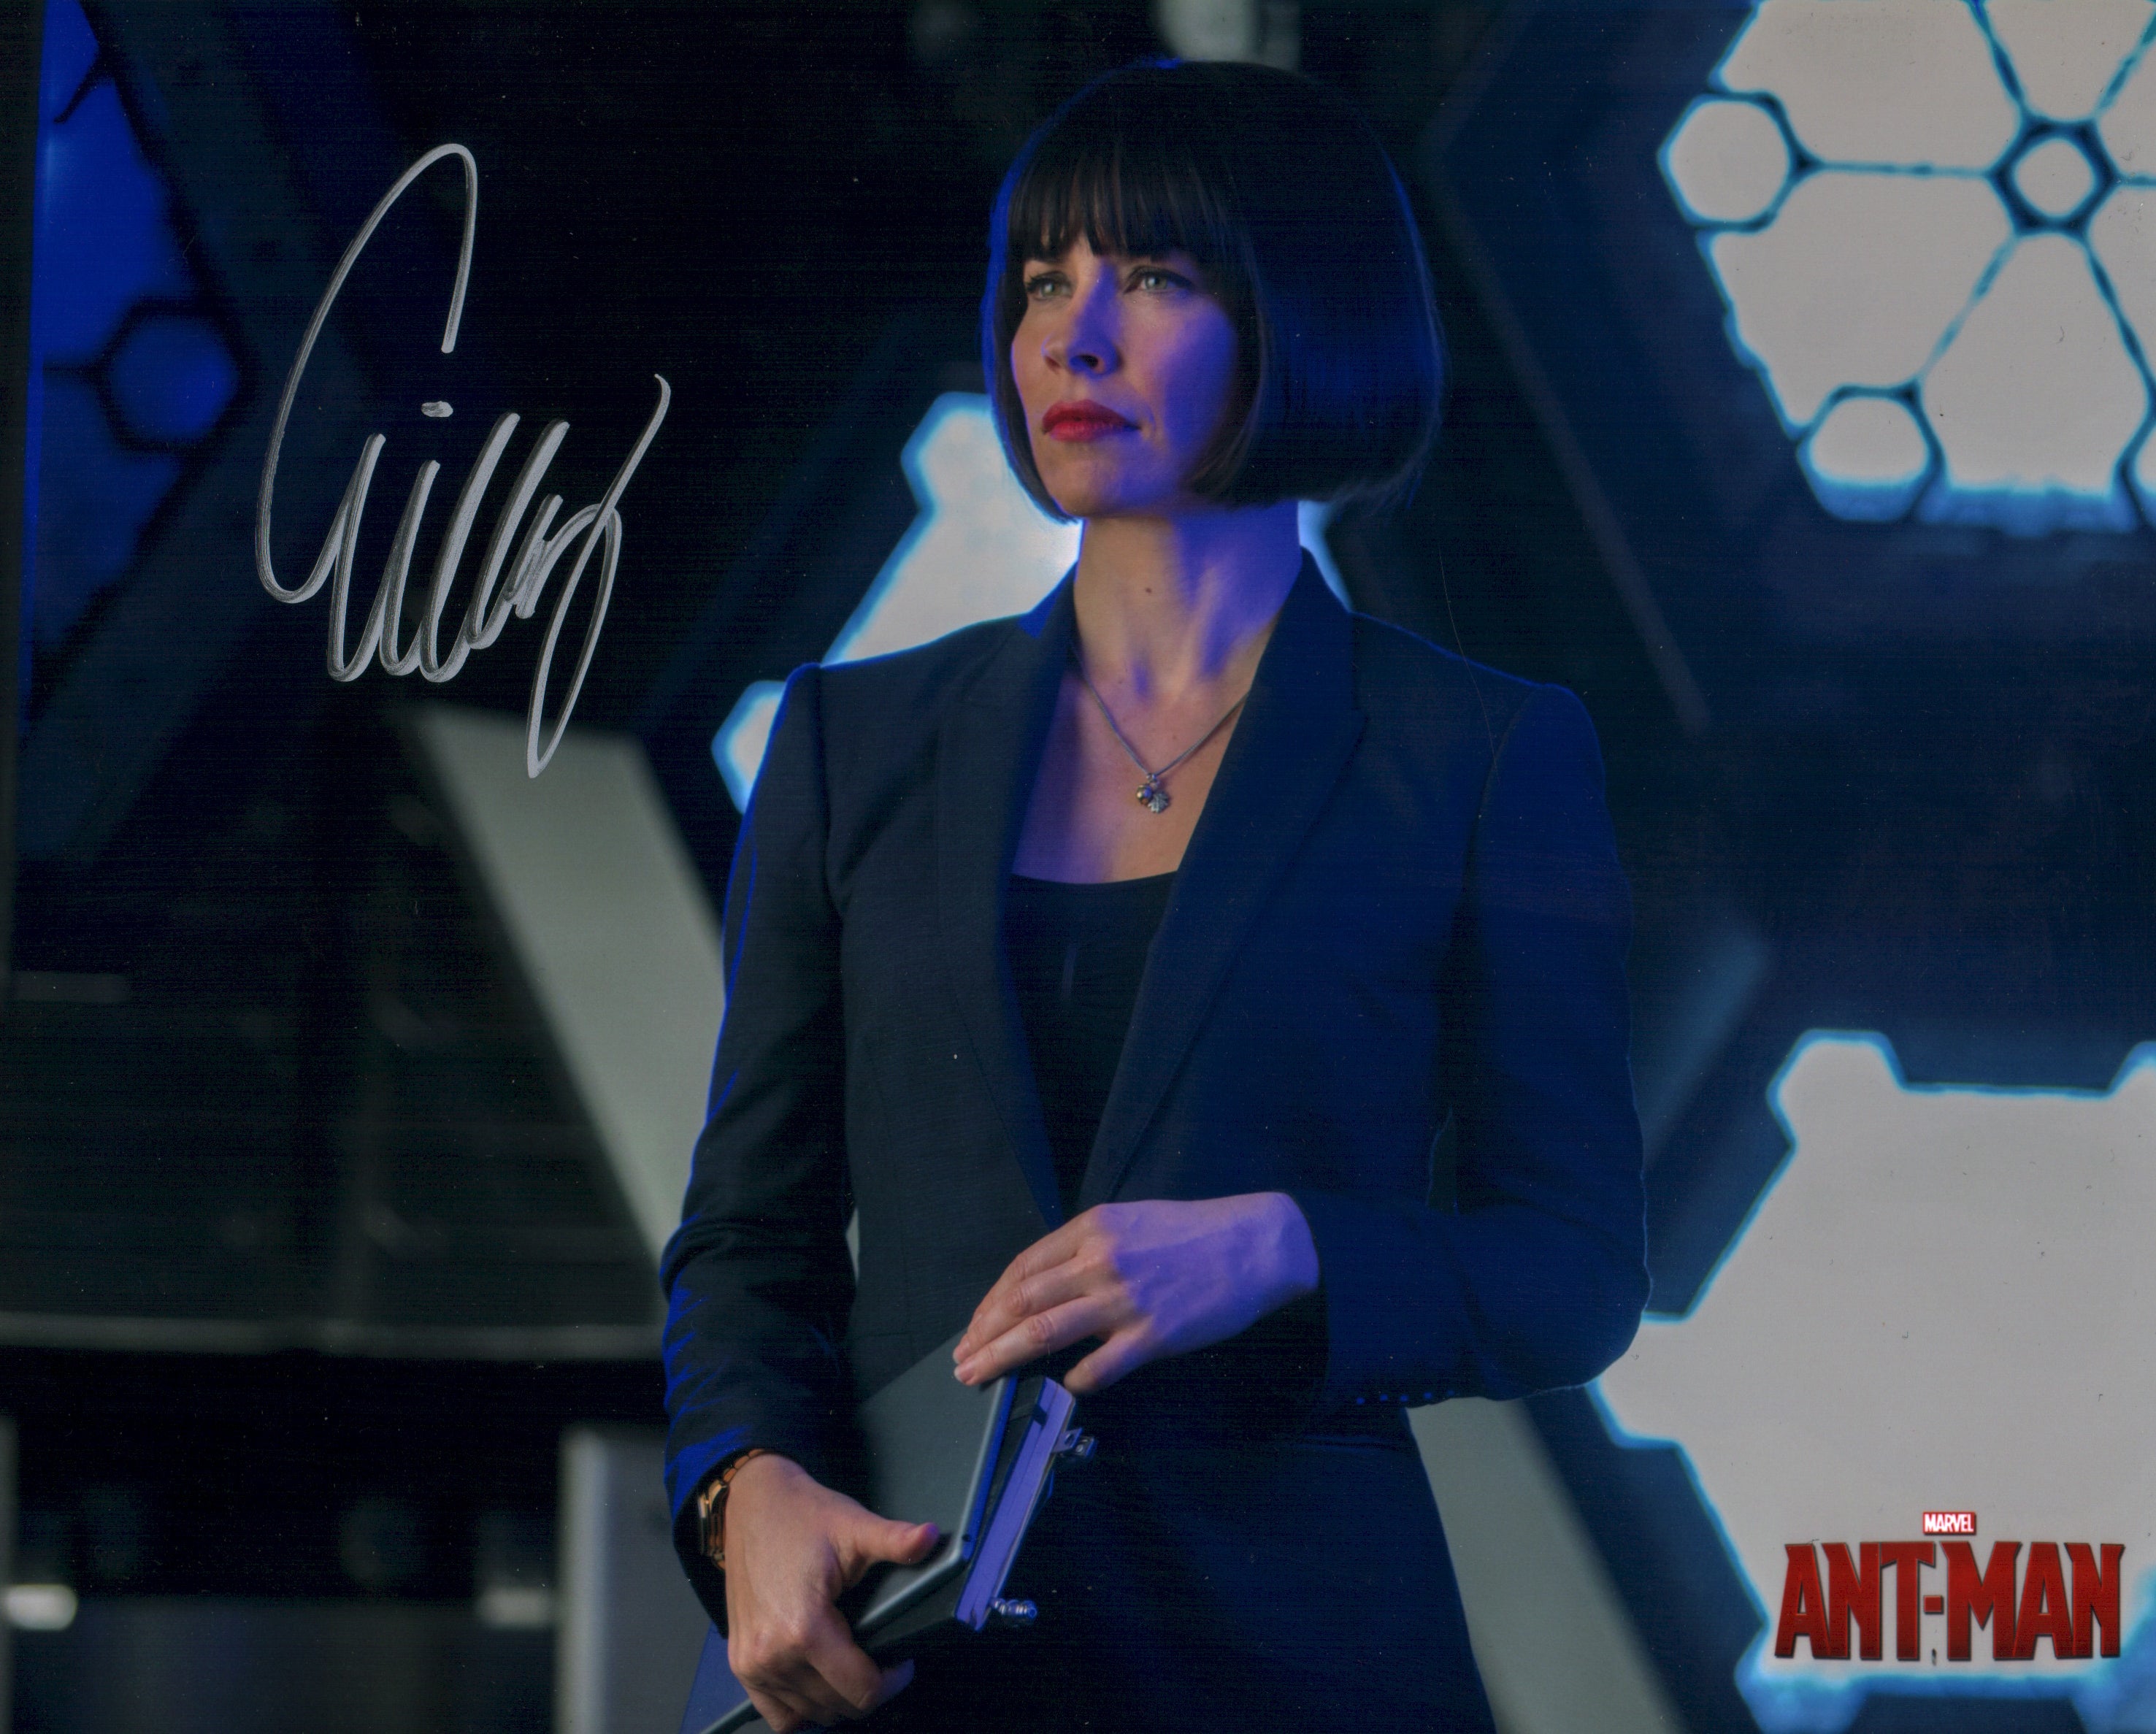 Evangeline Lilly Ant-Man 8x10 Signed Photo JSA Certified Autograph